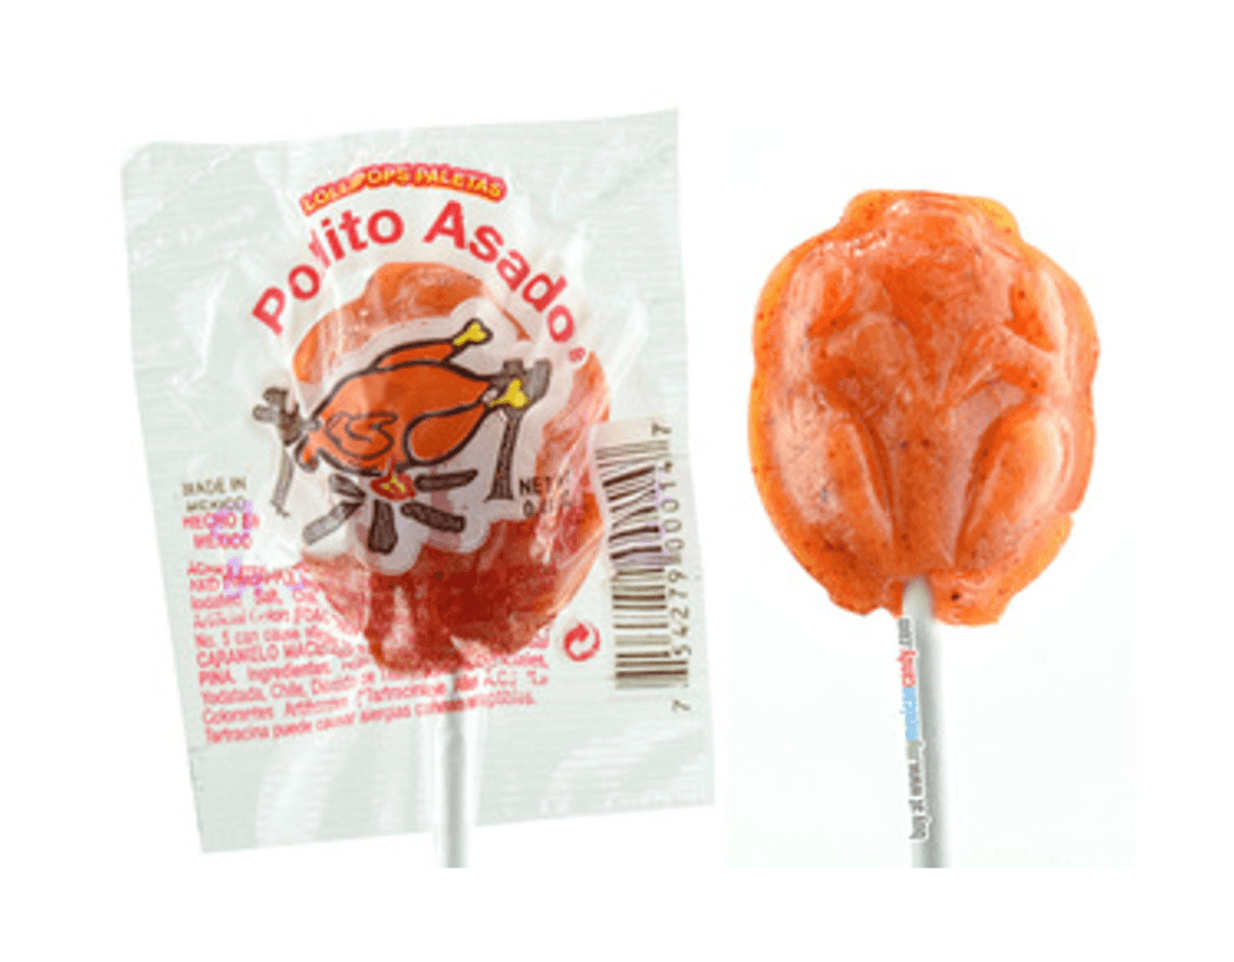 A Mexican lollipop shaped like a roast chicken and orange coloured.